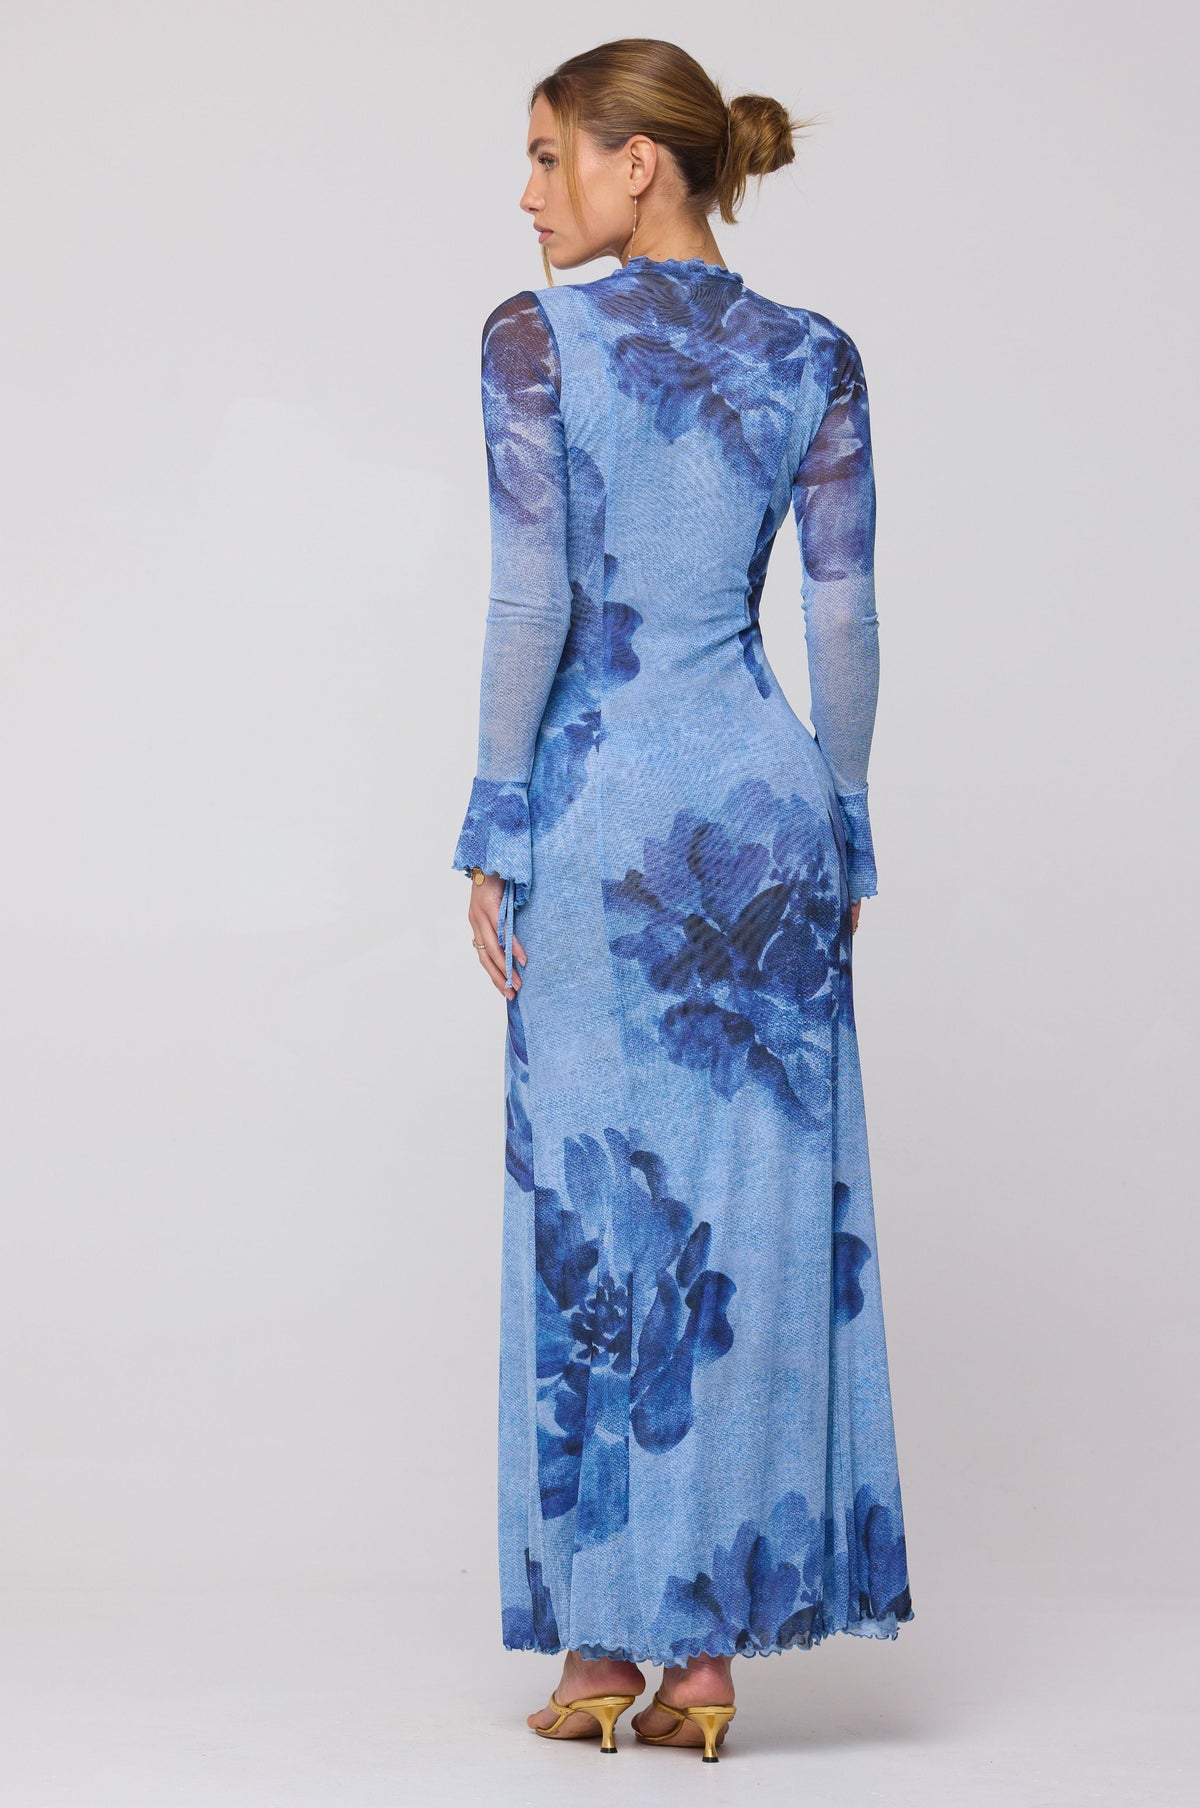 This is an image of Lennon Maxi in Indigo - RESA featuring a model wearing the dress